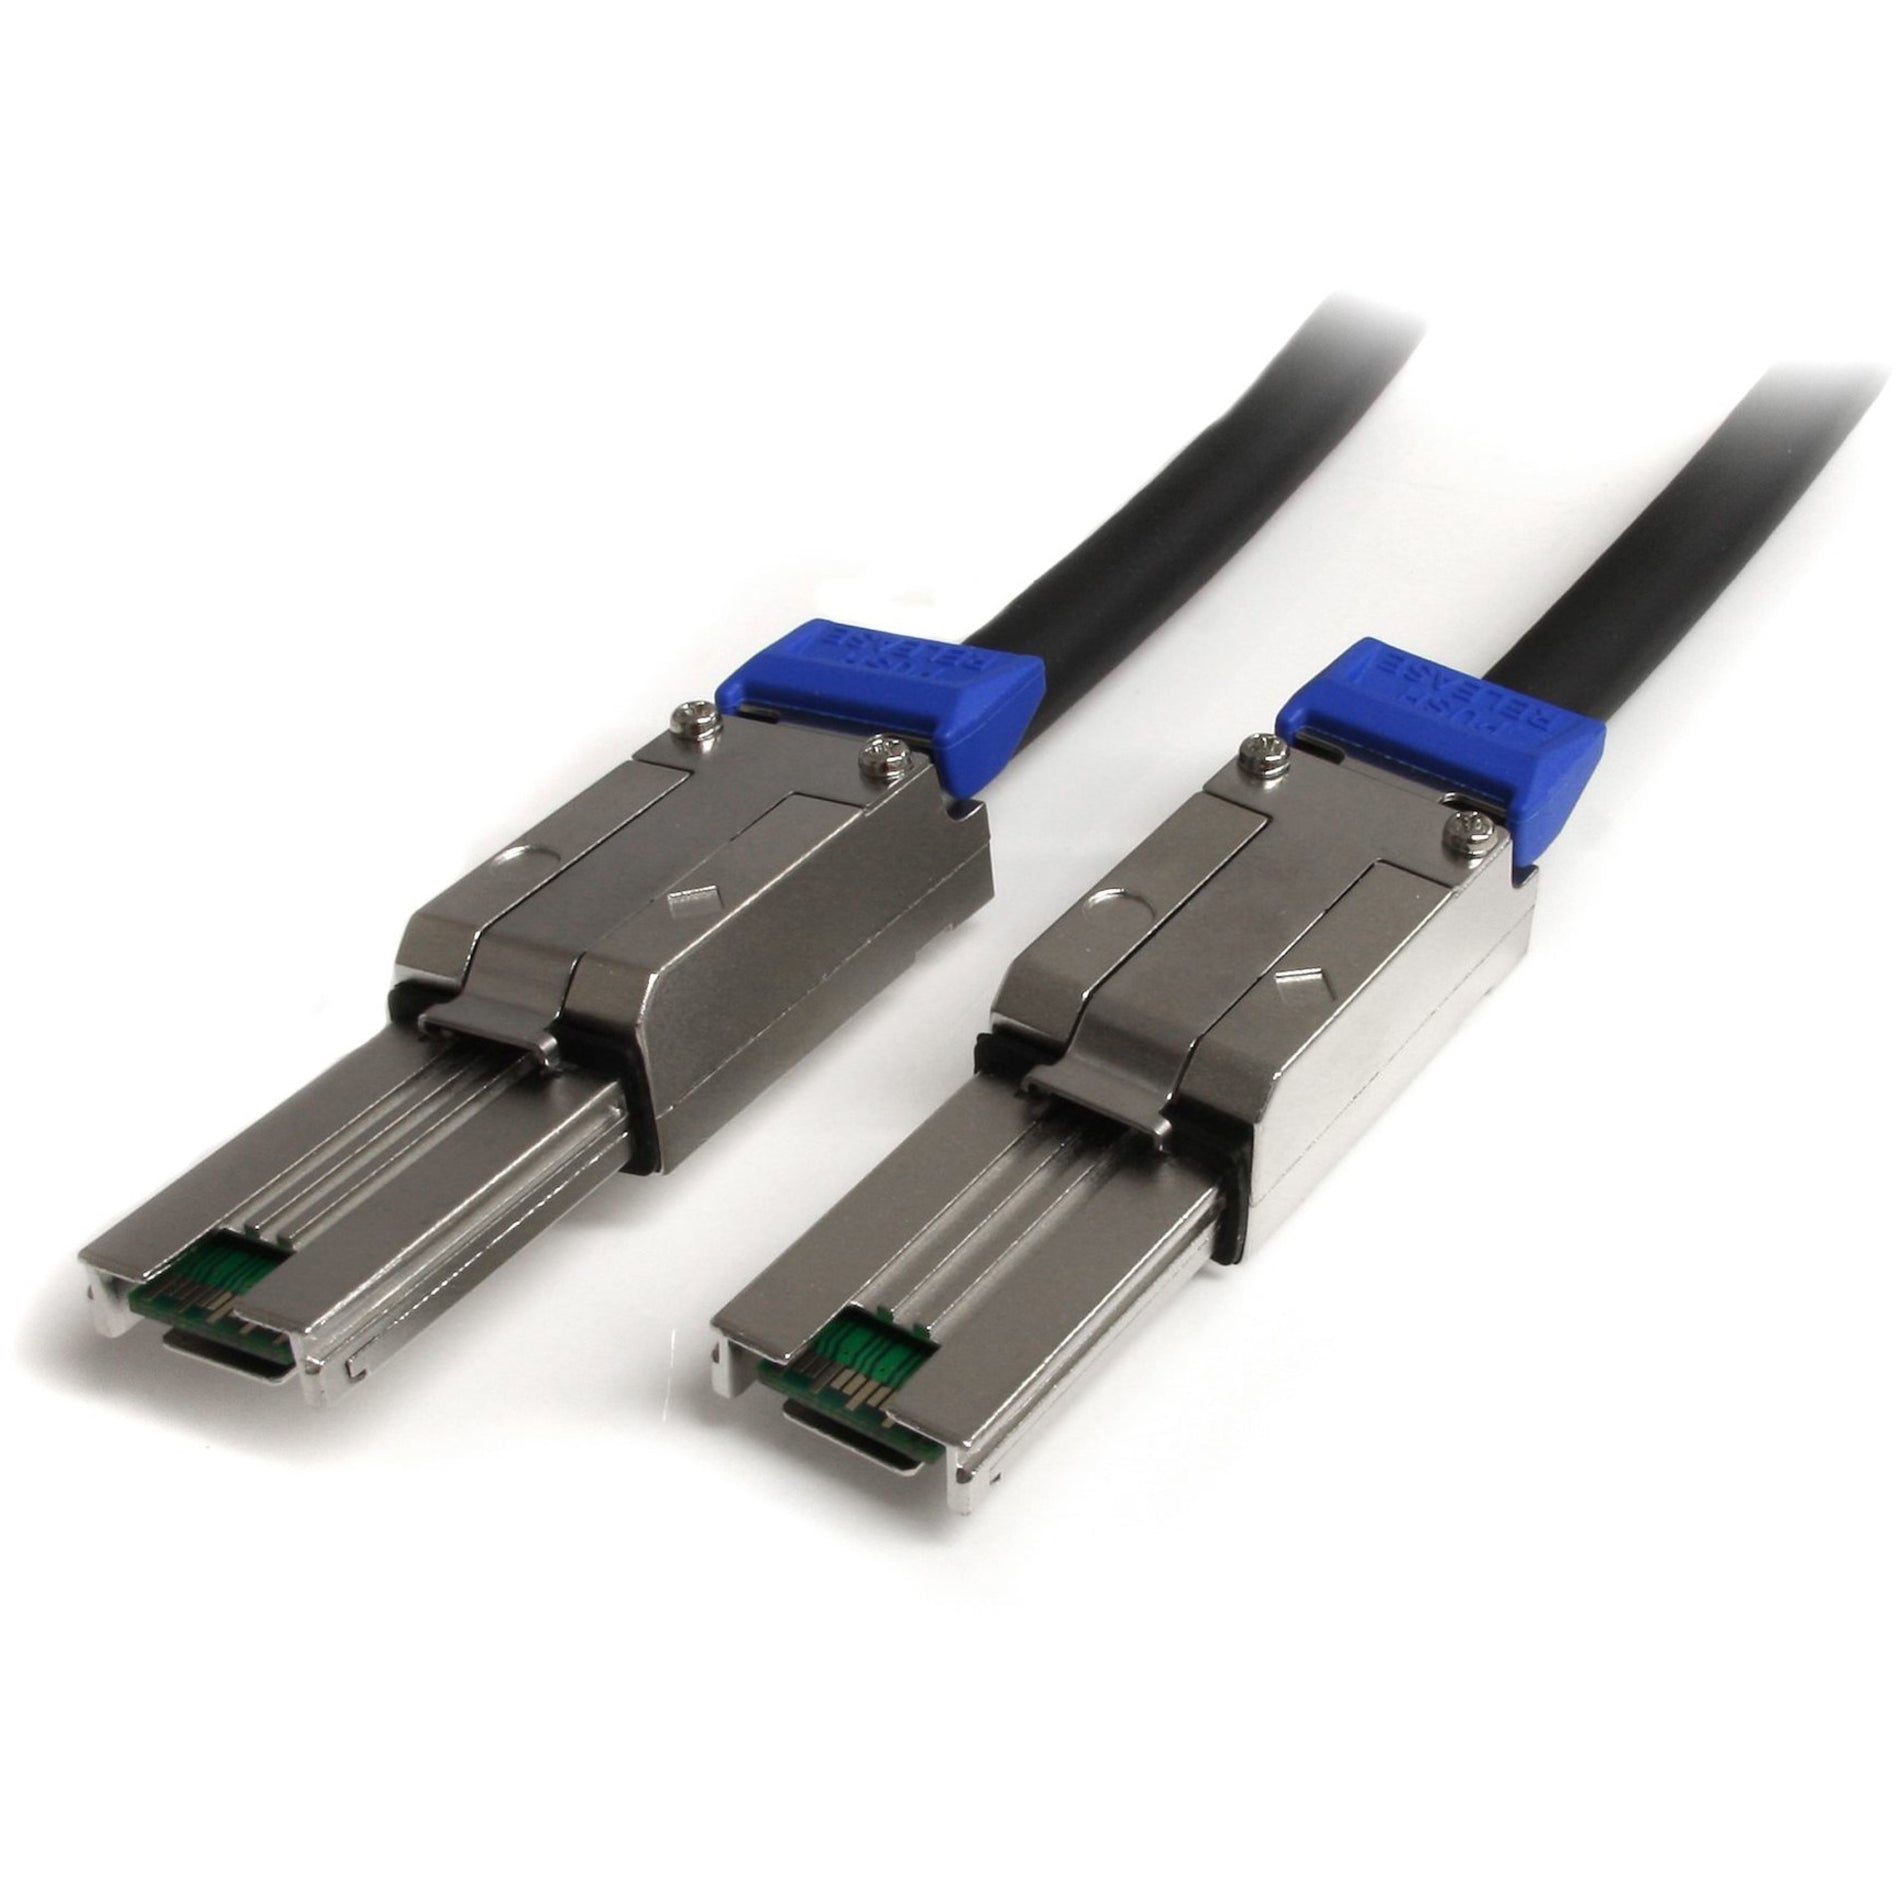 StarTech.com ISAS88882 2m External Mini SAS Cable - High-Speed Data Transfer, Latching Connector, 6.56 ft Length, Shielded